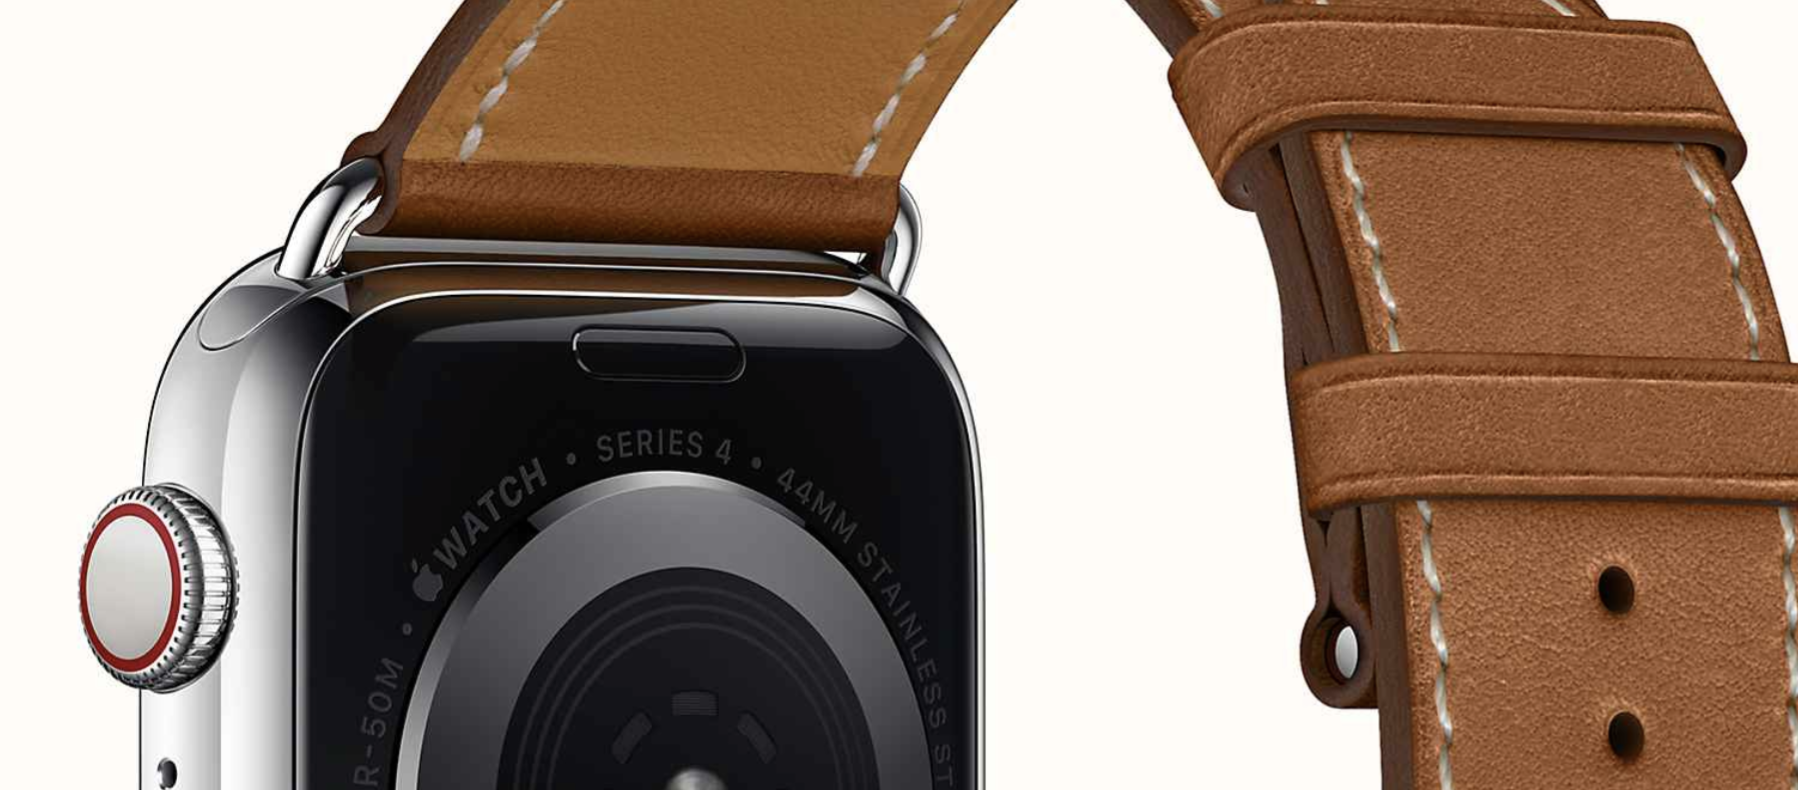 Apple Watch partner Hermès listing 'Series 5' bands, but may be mistake  [update: gone] - 9to5Mac